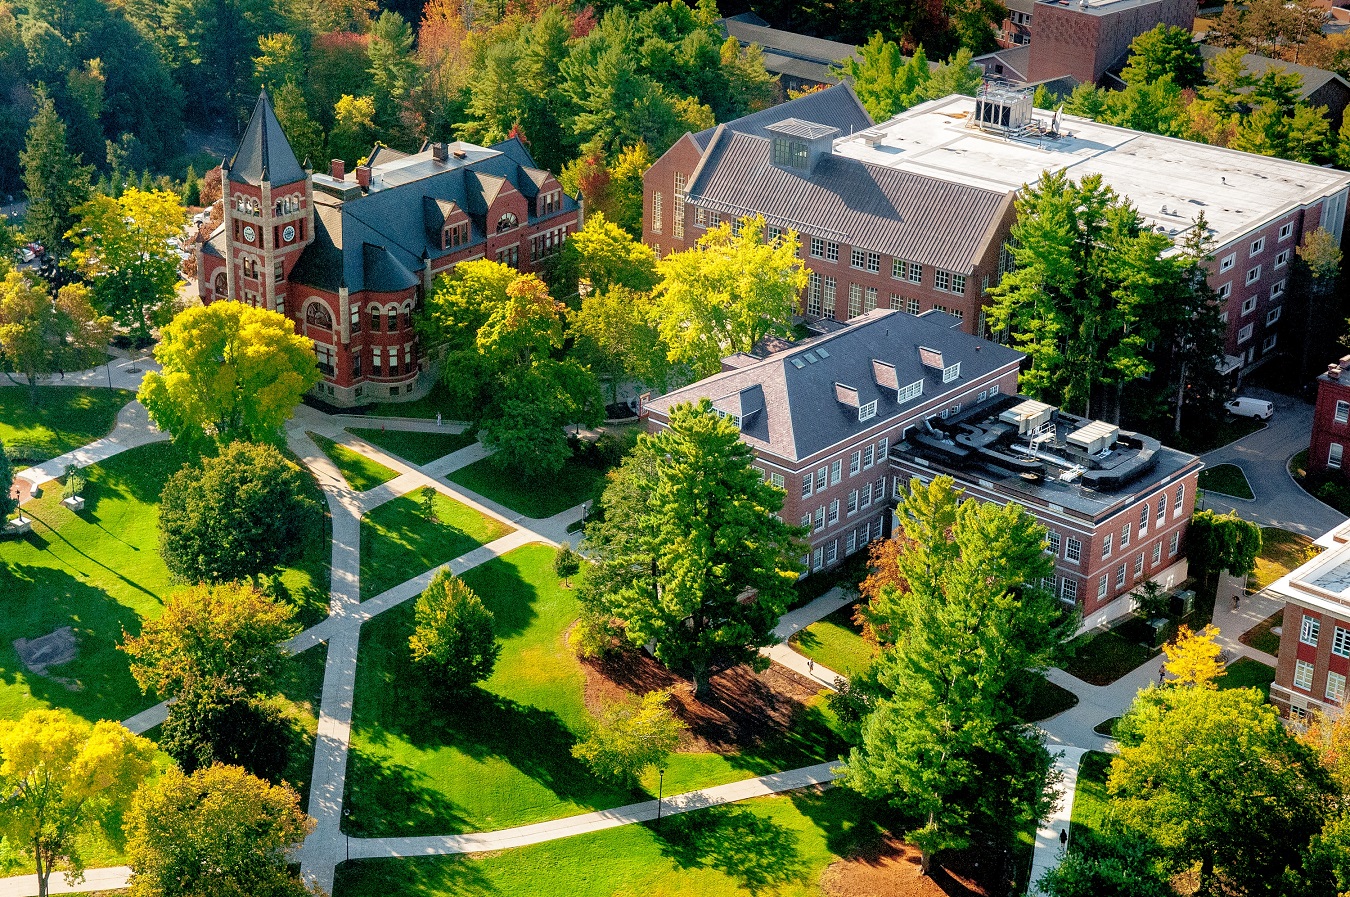 Tutoring Services at University of New Hampshire